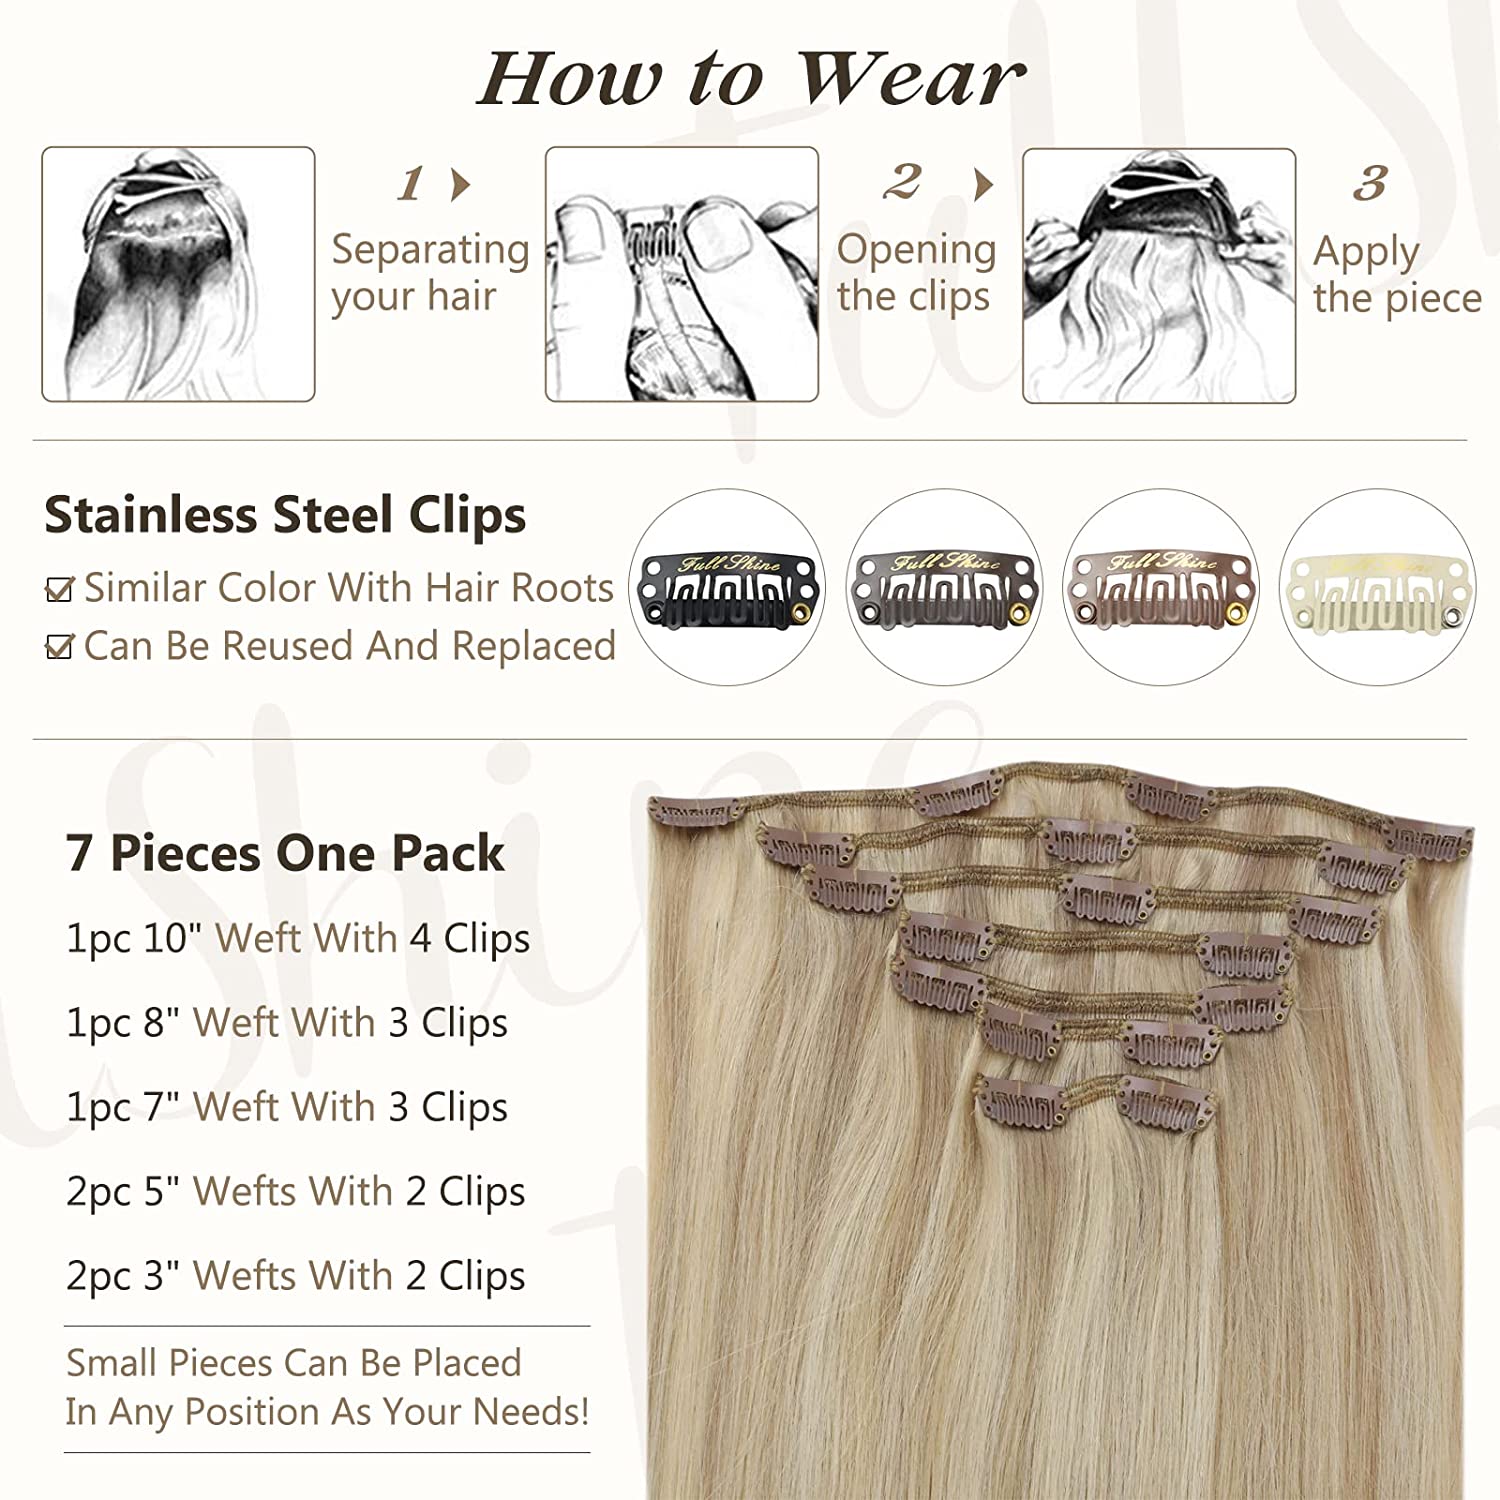 FShine Lace Clip In Hair Extensions Clip in Hair Extensions #16P22 - FShine Shop